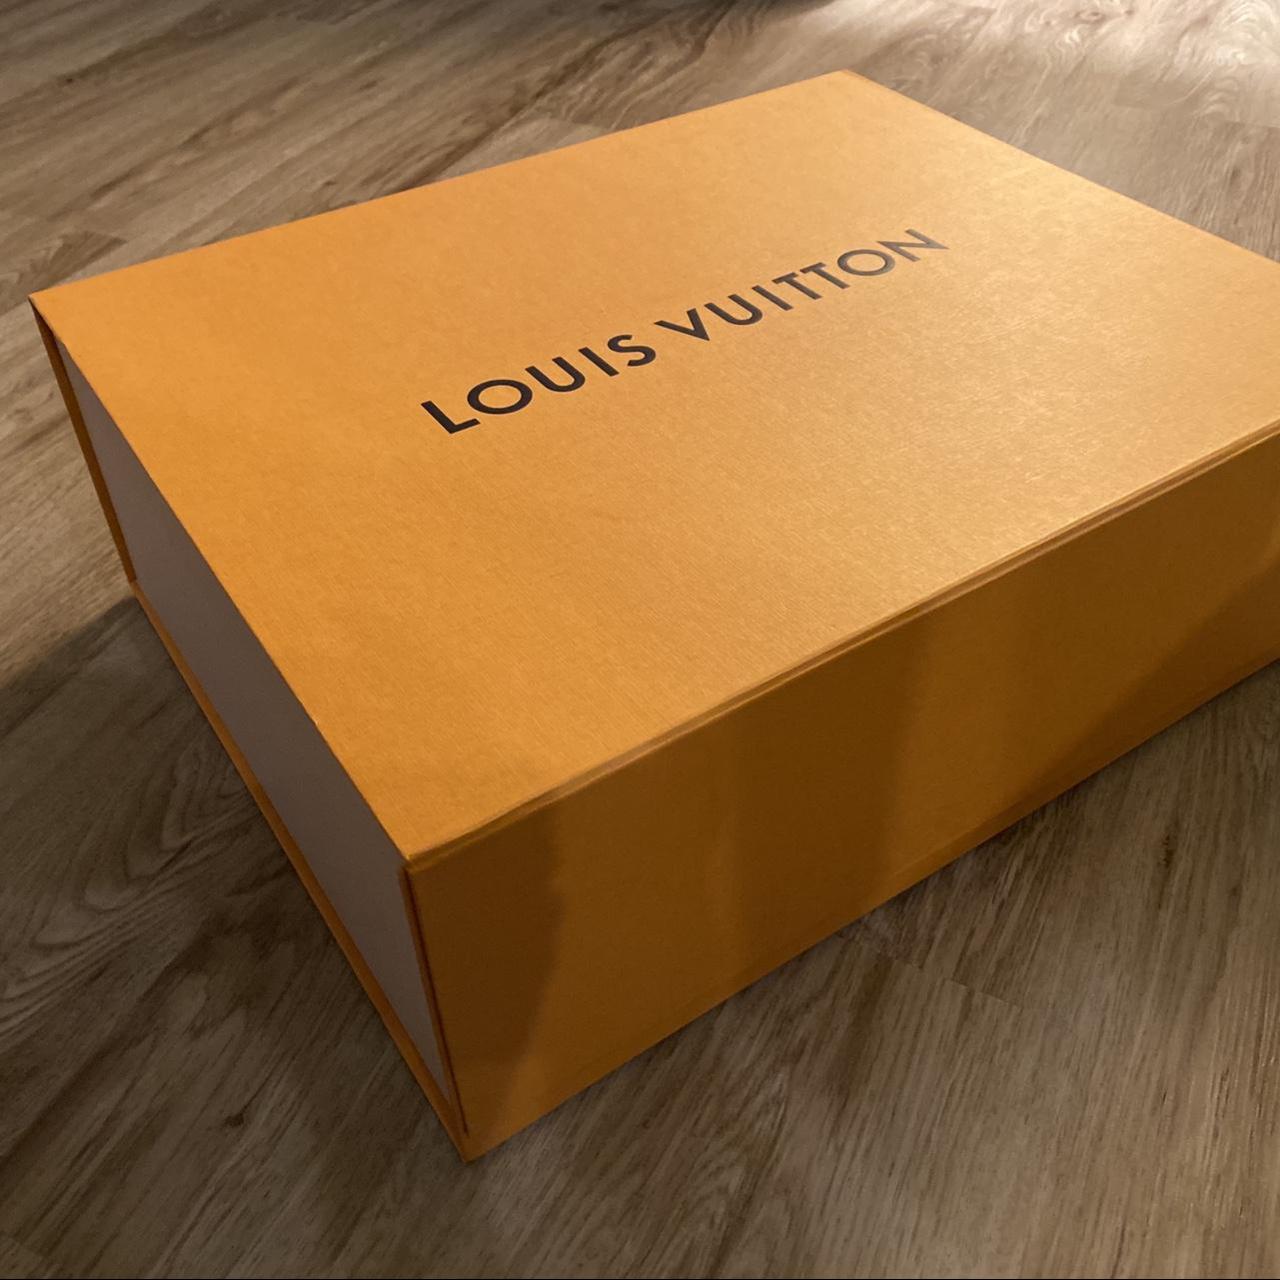 Authentic Louis Vuitton Magnetic Packing Box